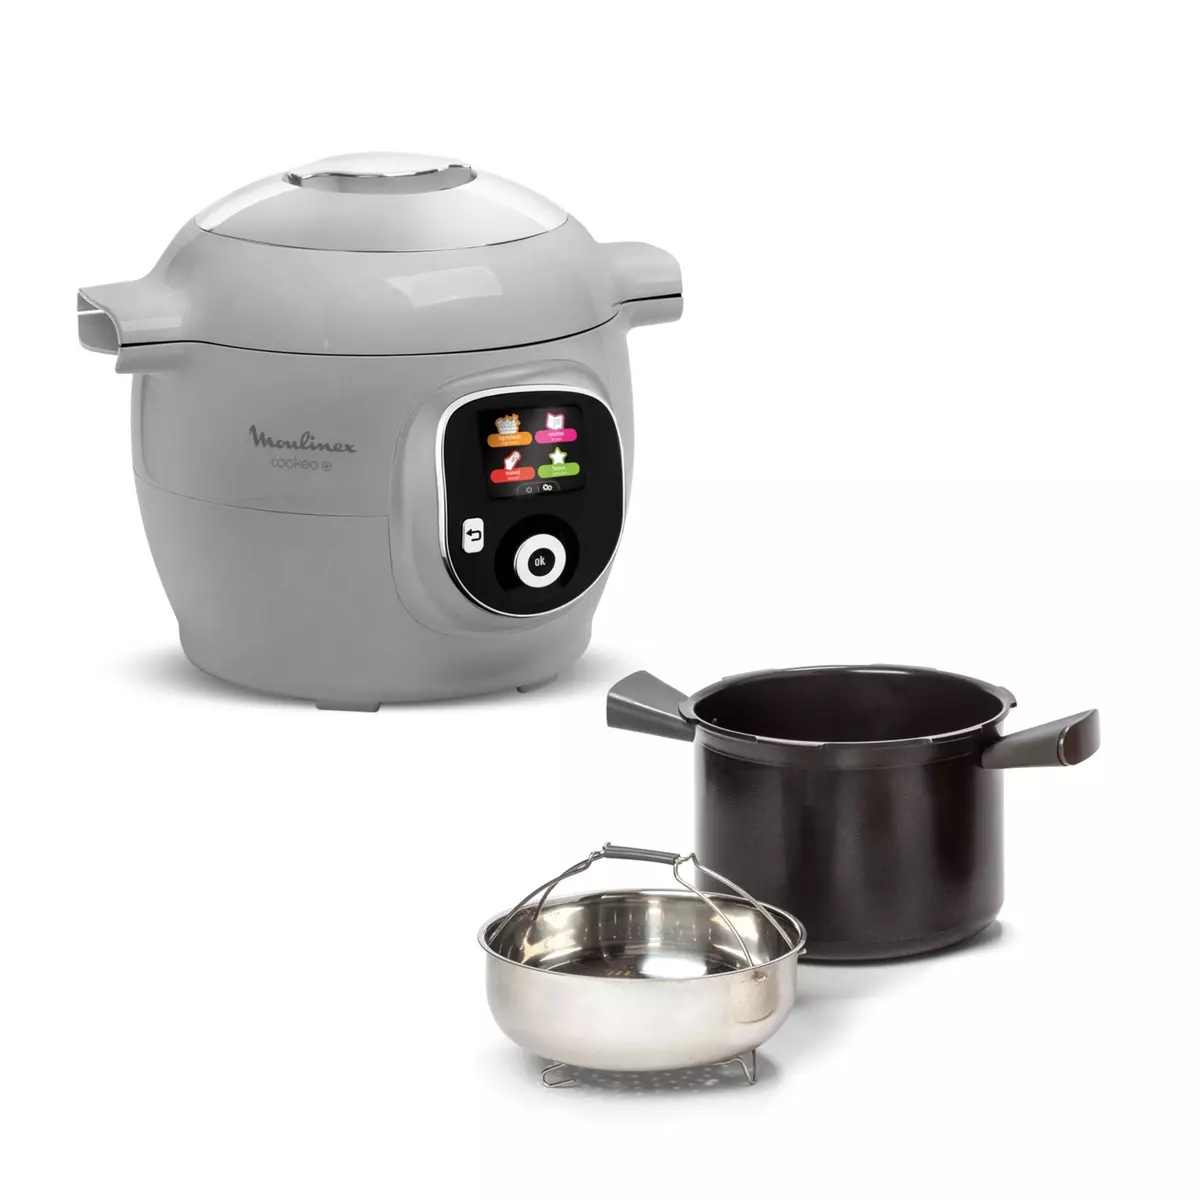 Cookeo CE85B510 + extra crisp, Couvercle Cookeo, 4 programmes